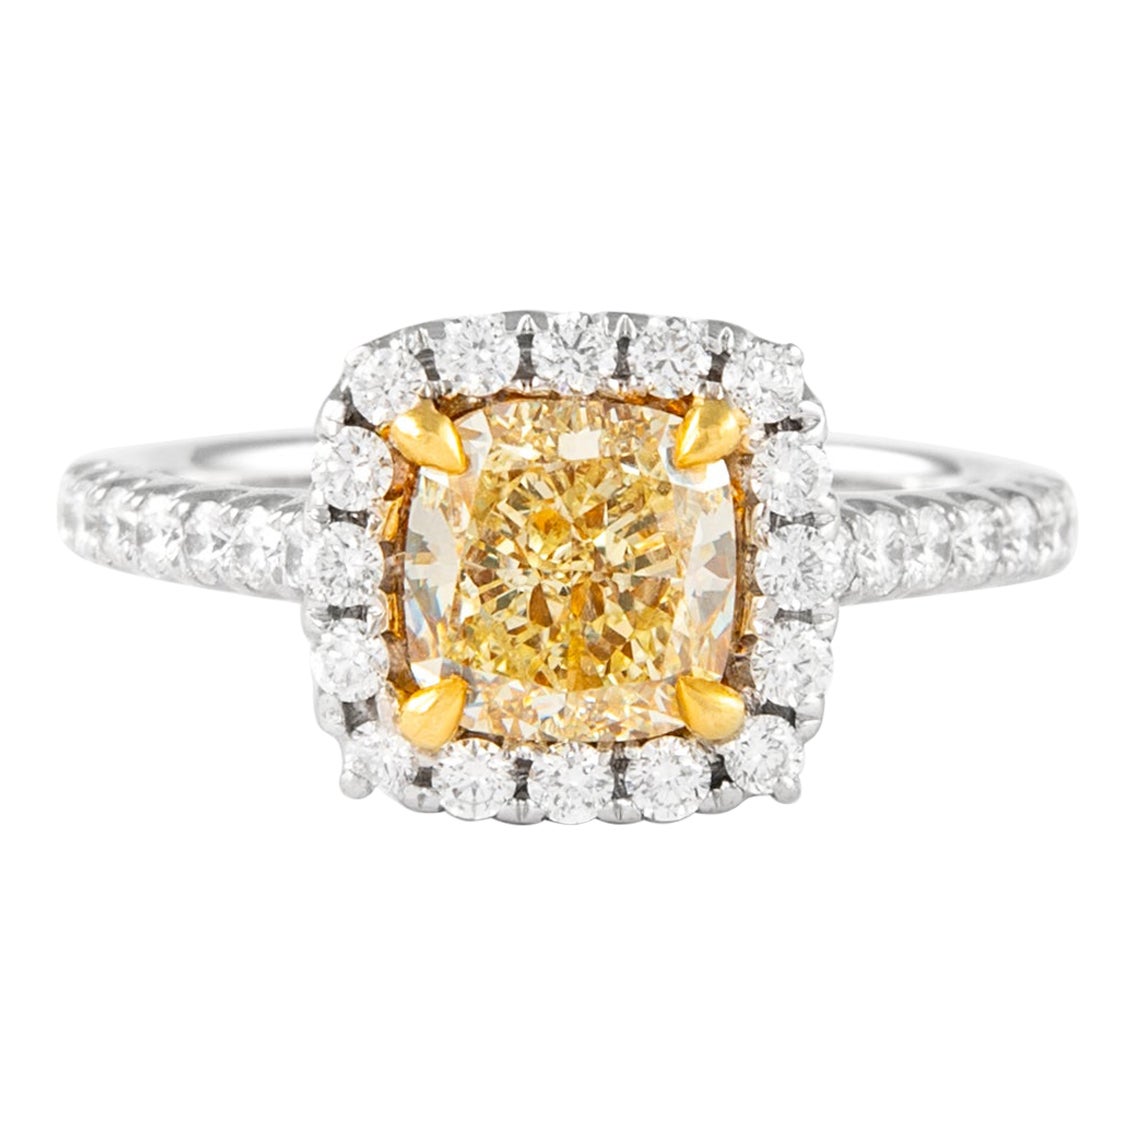 Alexander 2.31ctt Fancy Yellow VS1 Cushion Diamond with Halo Ring 18k Two Tone For Sale